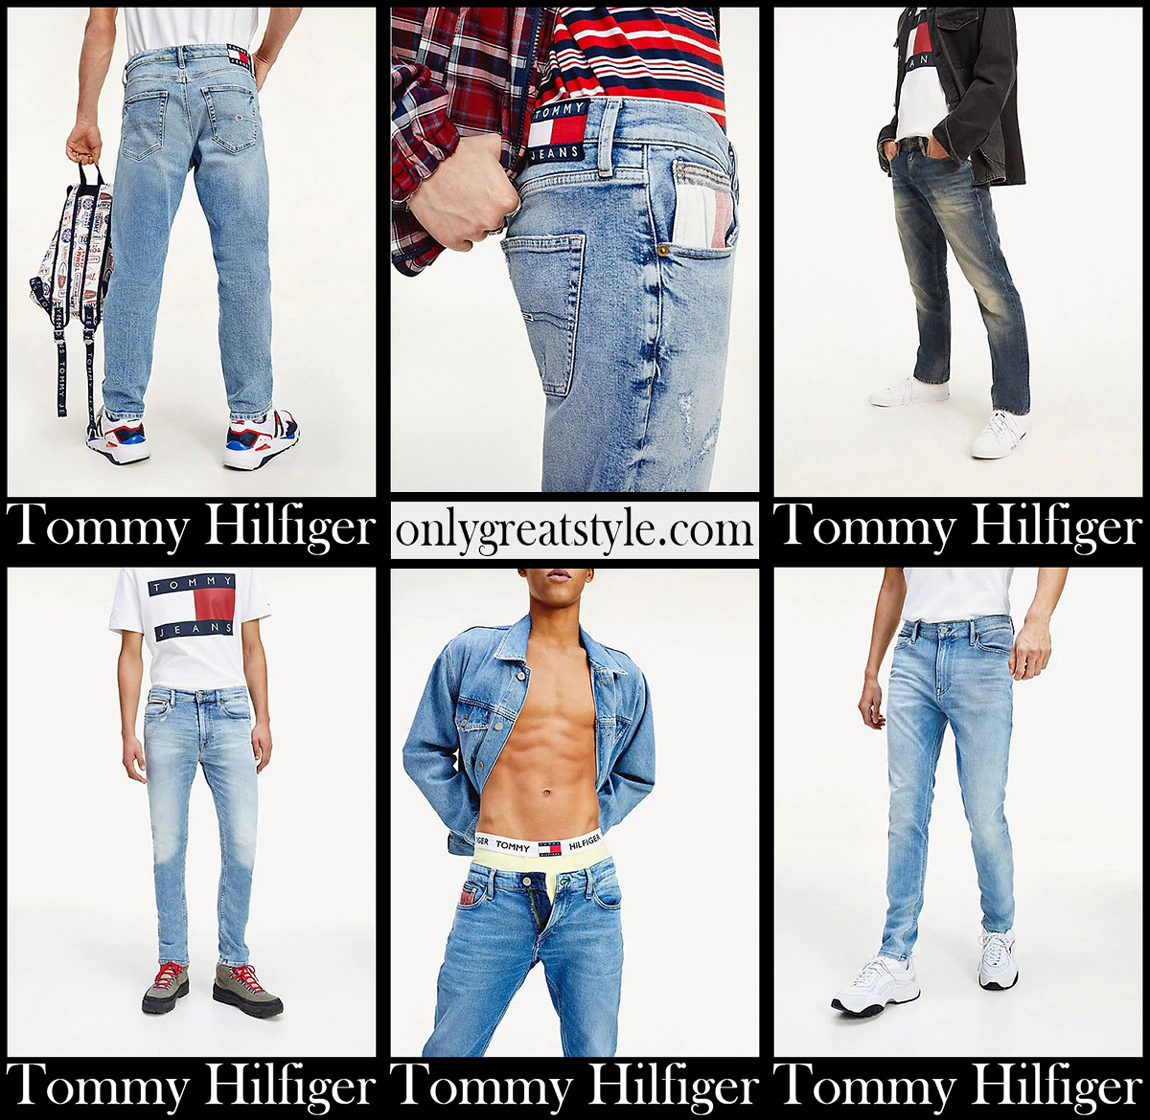 matching tommy hilfiger outfits for couples